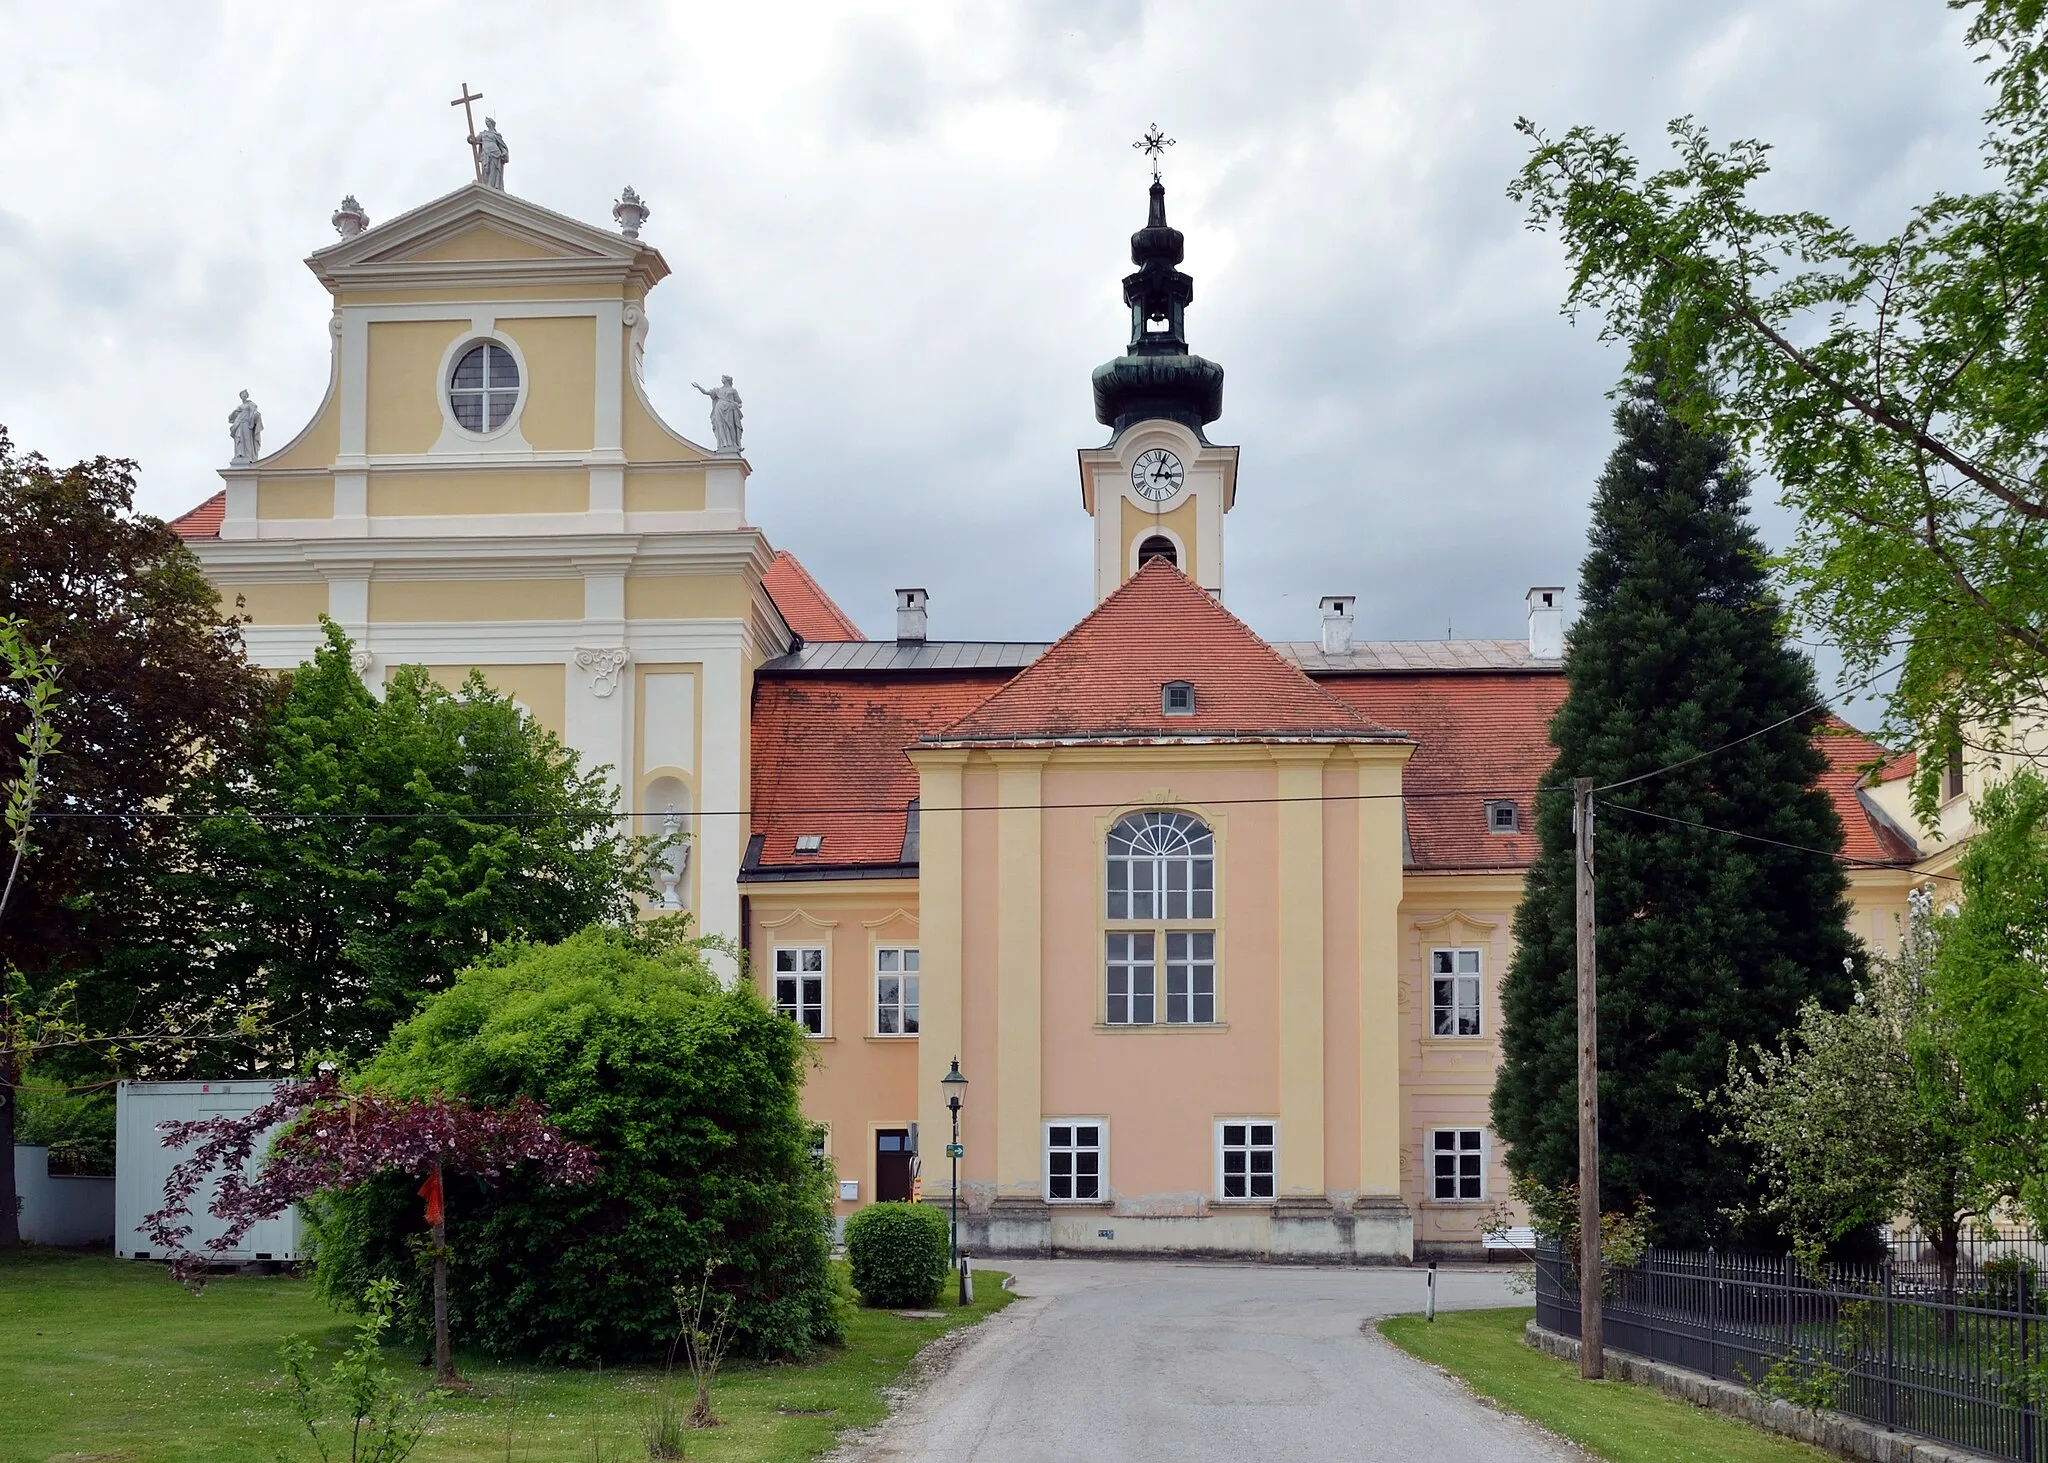 Photo showing: Catholic parish and pilgrimage church Maria Himmelfahrt (assumption) at Heiligenkreuz, Gutenbrunn, municipality of Herzogenburg. The church was built in 1755-78 and is protected as a cultural heritage monument.
Maria Himmelfahrt at the left side, in the middle the former chapel dedicated to Mary.